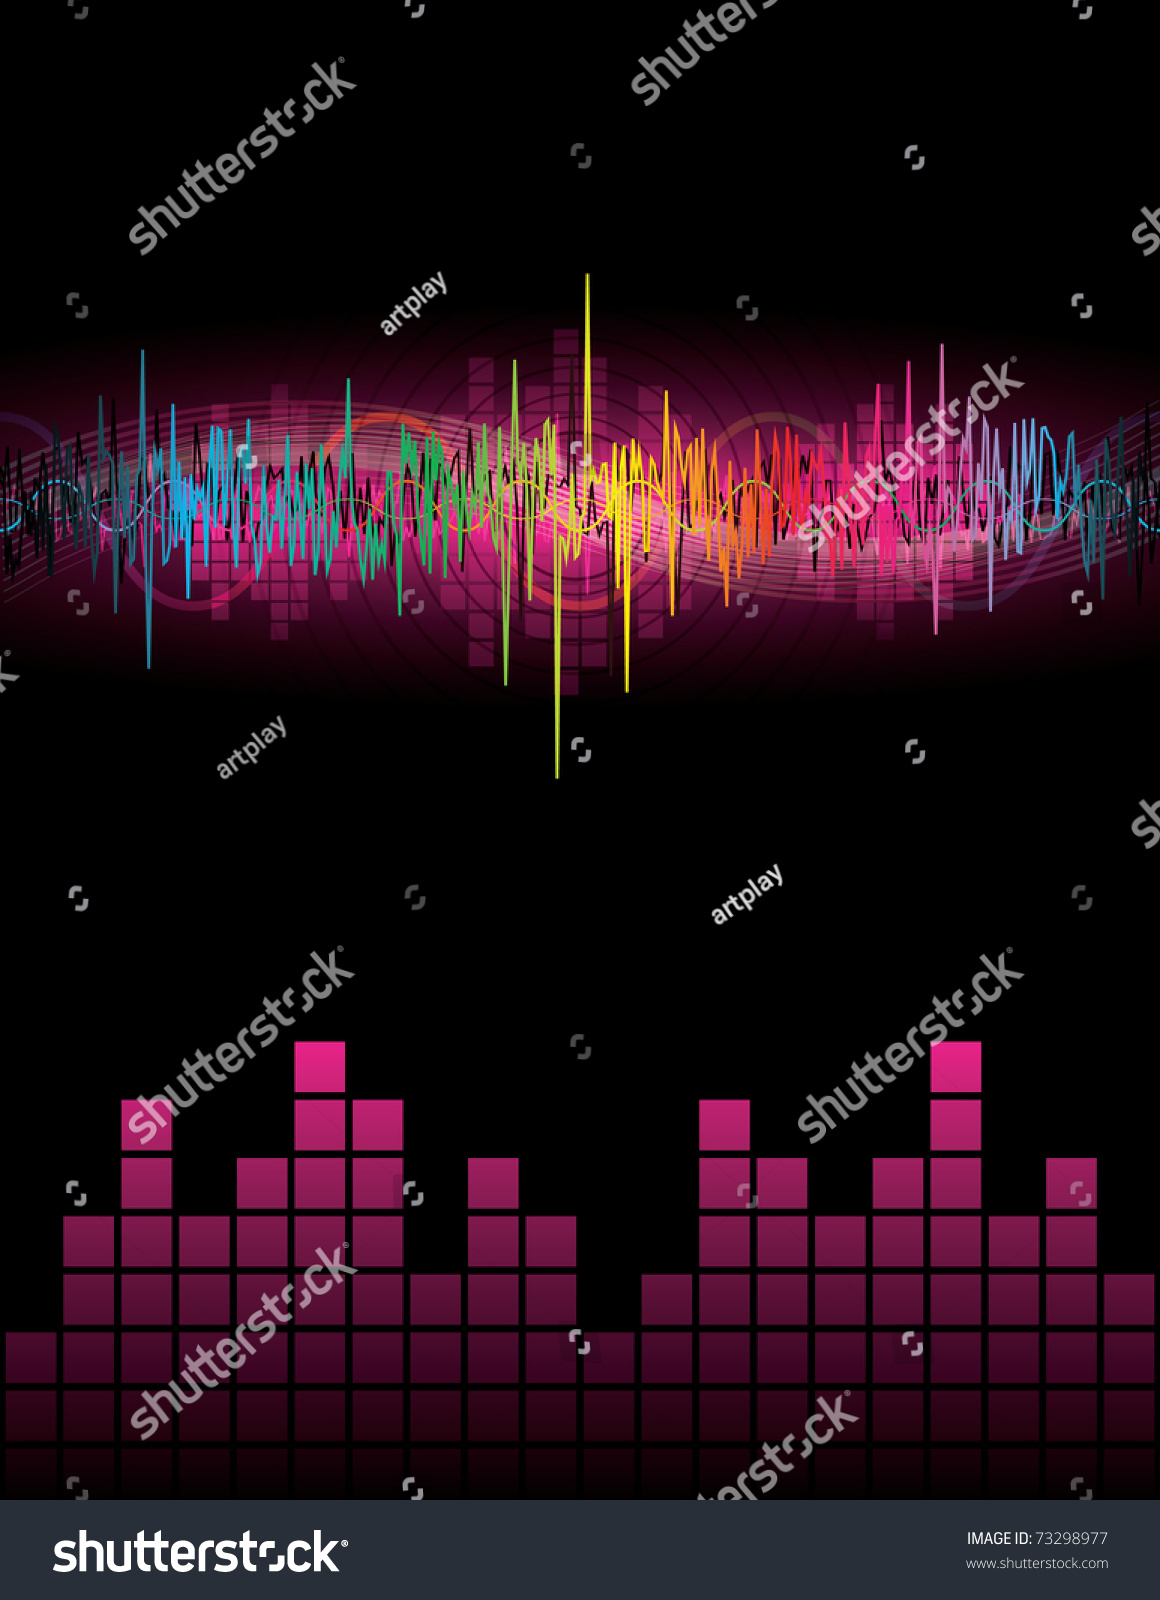 Rainbow Colored Sound Wave Stock Vector 73298977 - Shutterstock